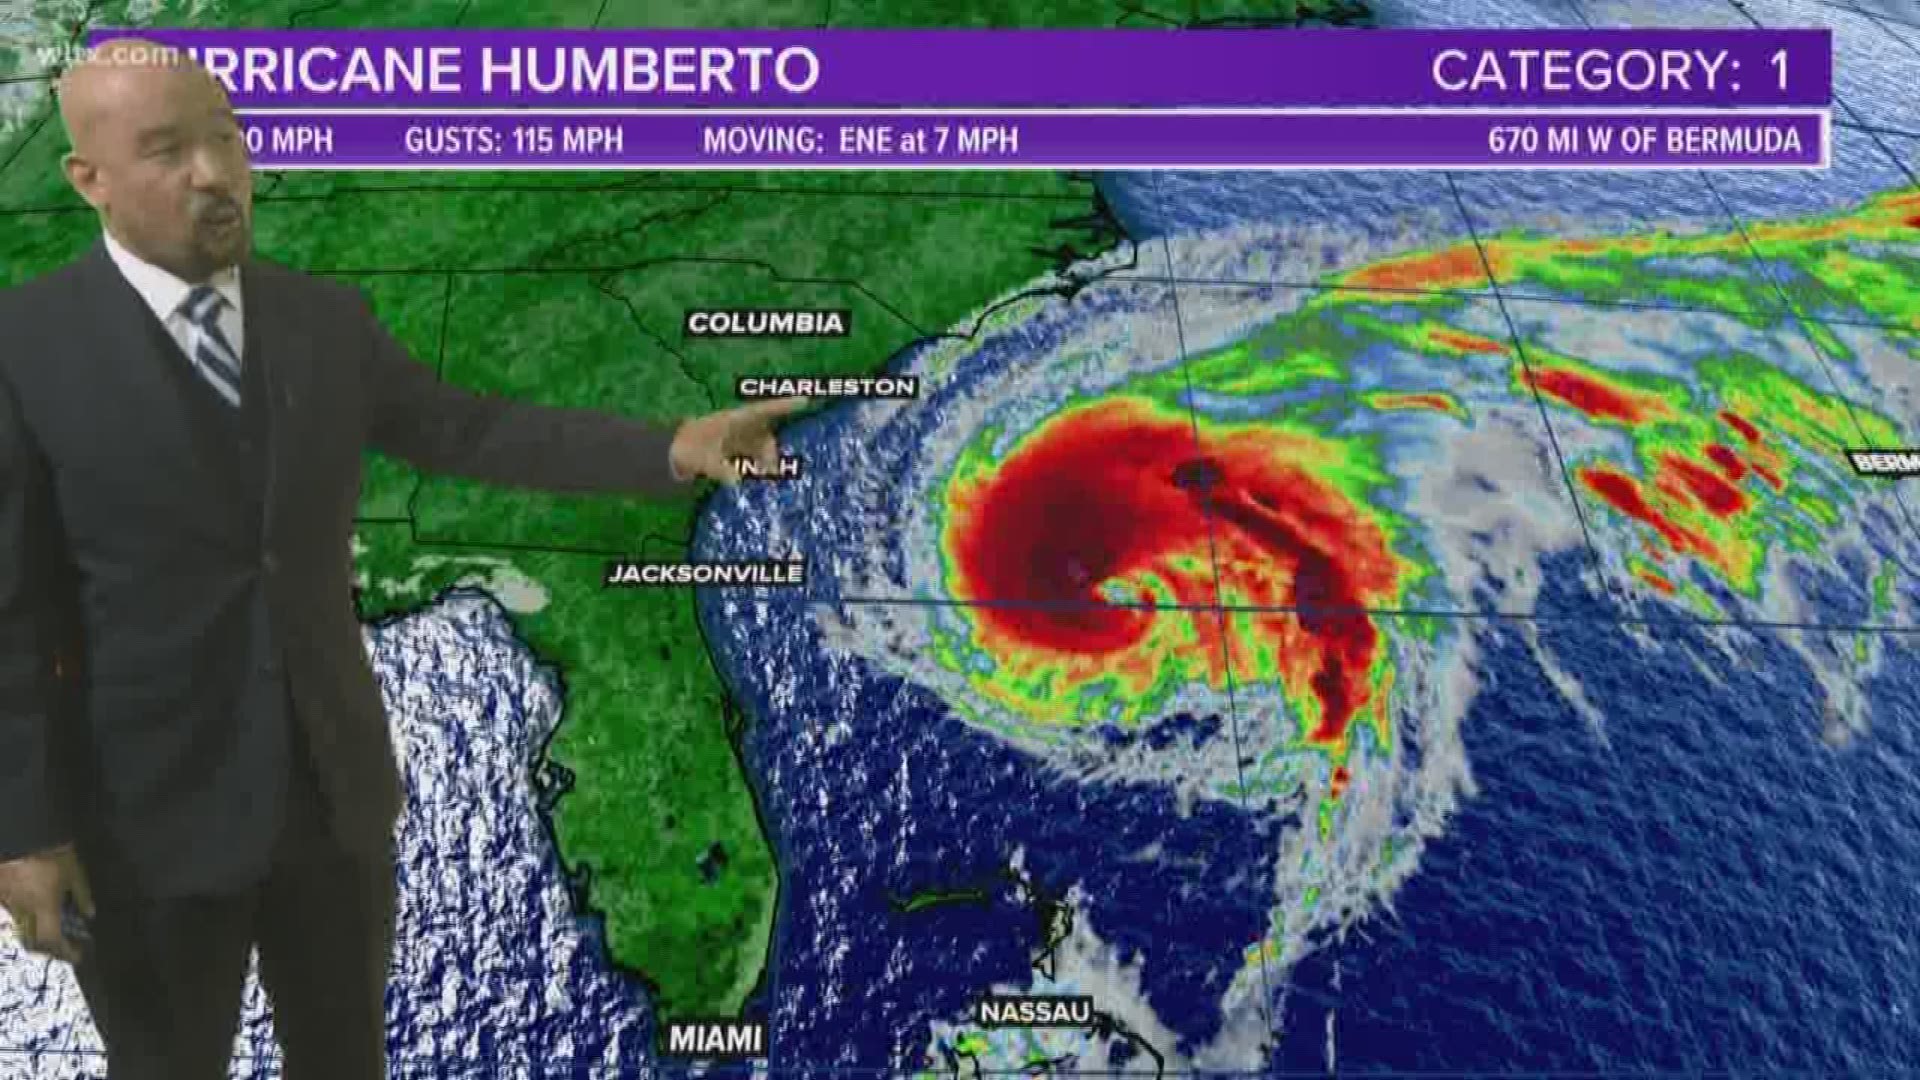 Hurricane Humberto is moving away from the United States. But there's another system, called Invest 97L, that the southeastern U.S. may have to watch. It could become Imelda in a few days.